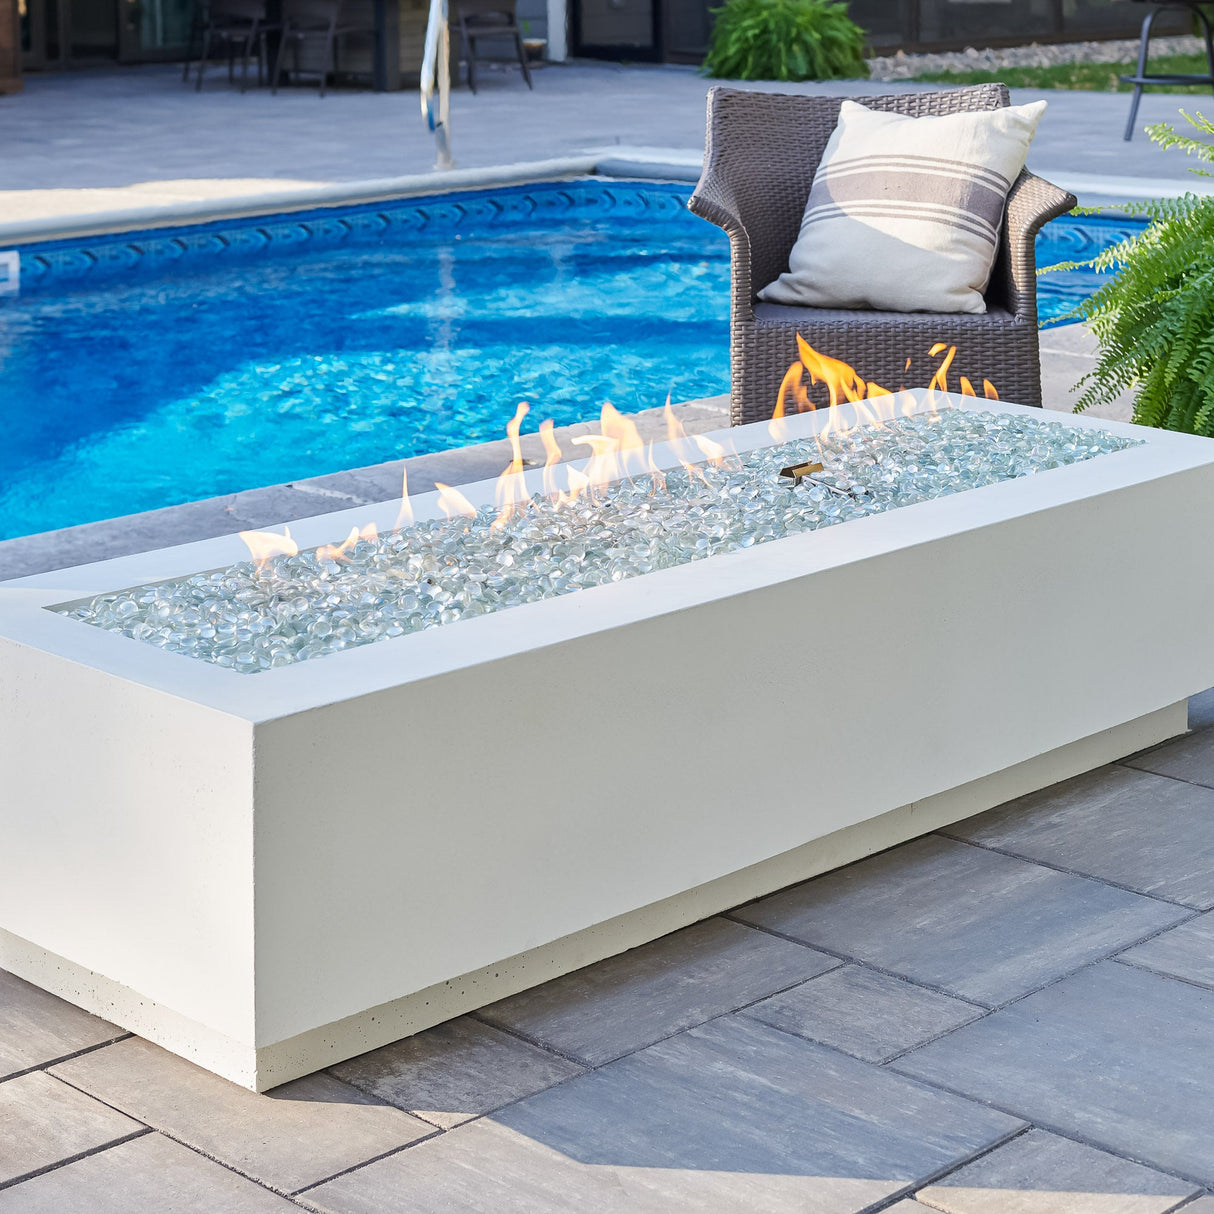 A White Cove Linear Gas Fire Pit Table 72" next to a large pool and patio furniture